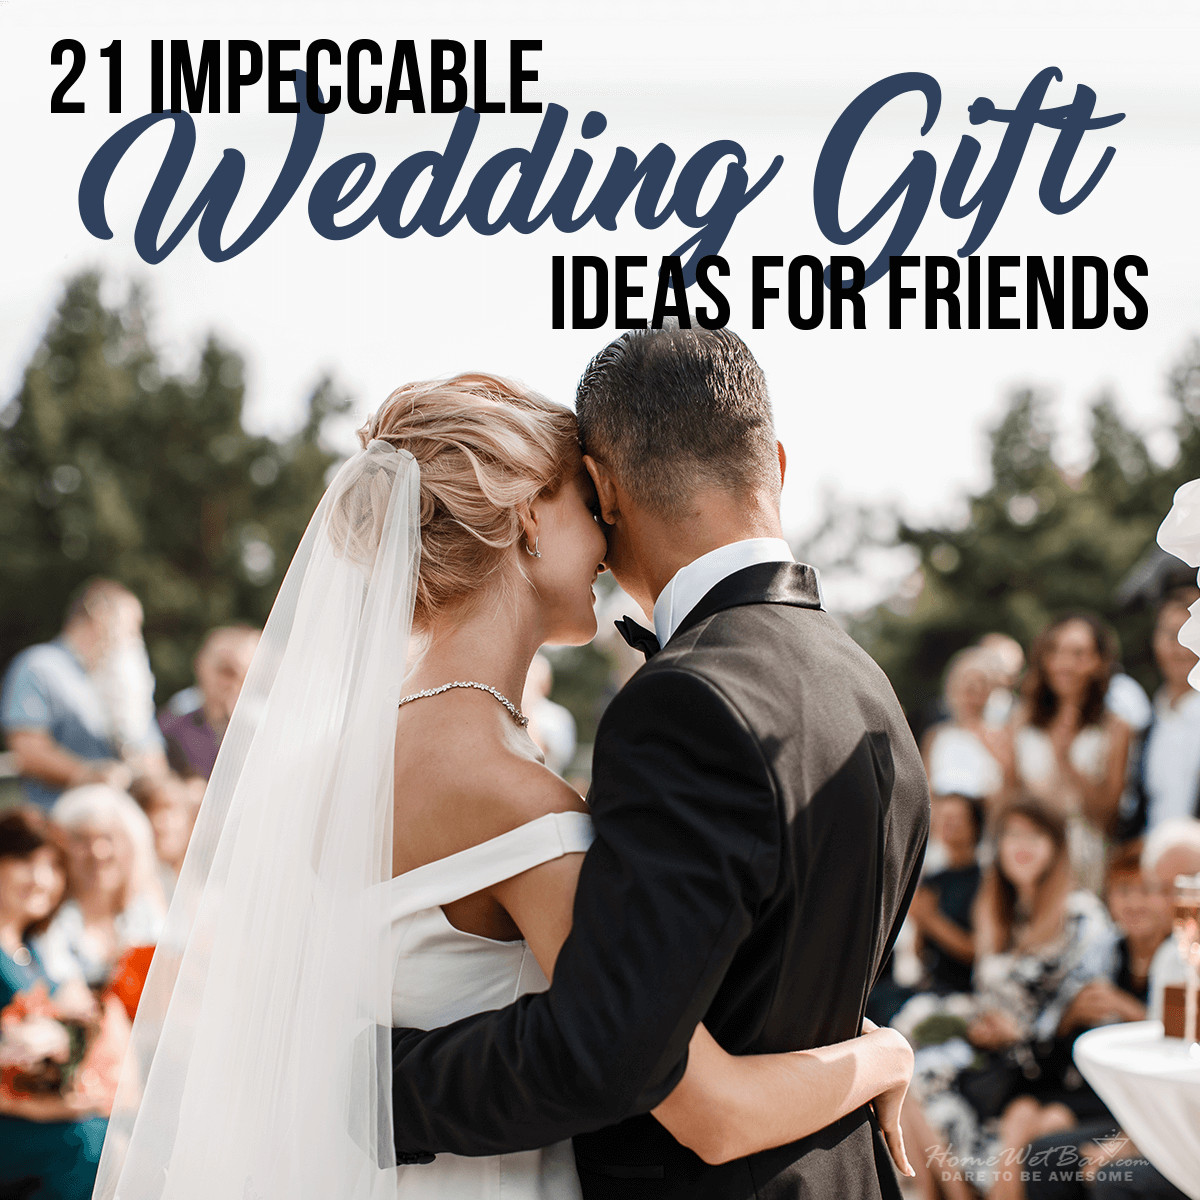 Gift Ideas For Couple Friends
 21 Impeccable Wedding Gift Ideas for Friends